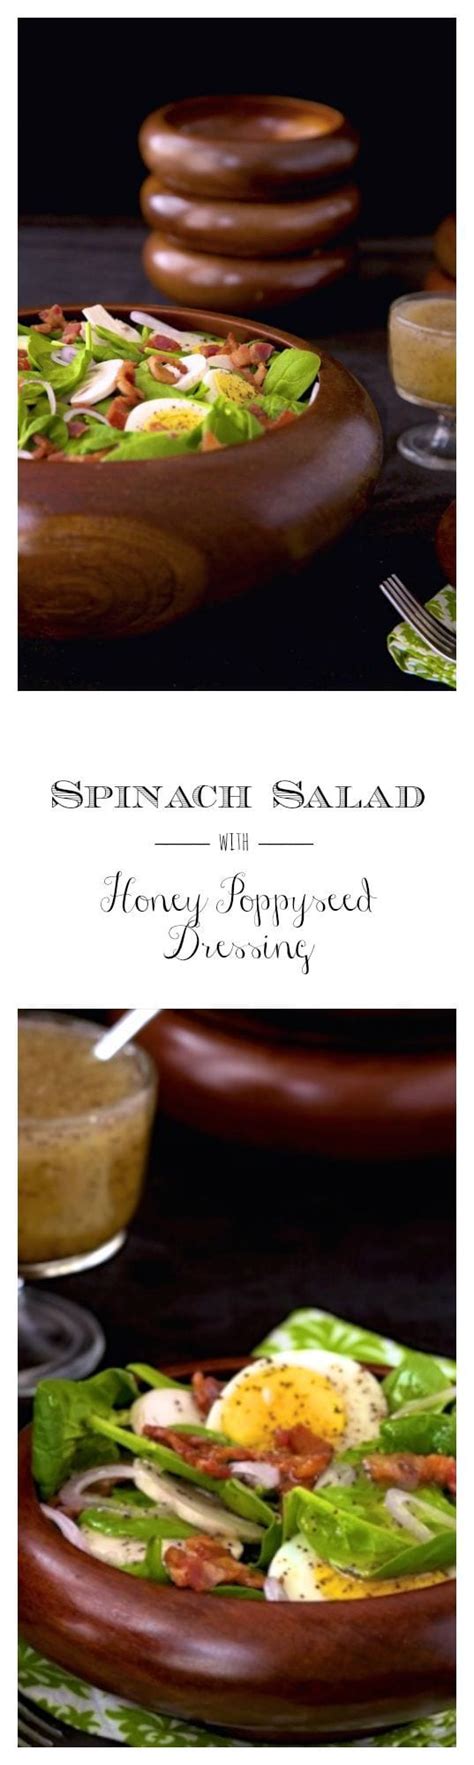 Spinach Salad With Poppyseed Dressing